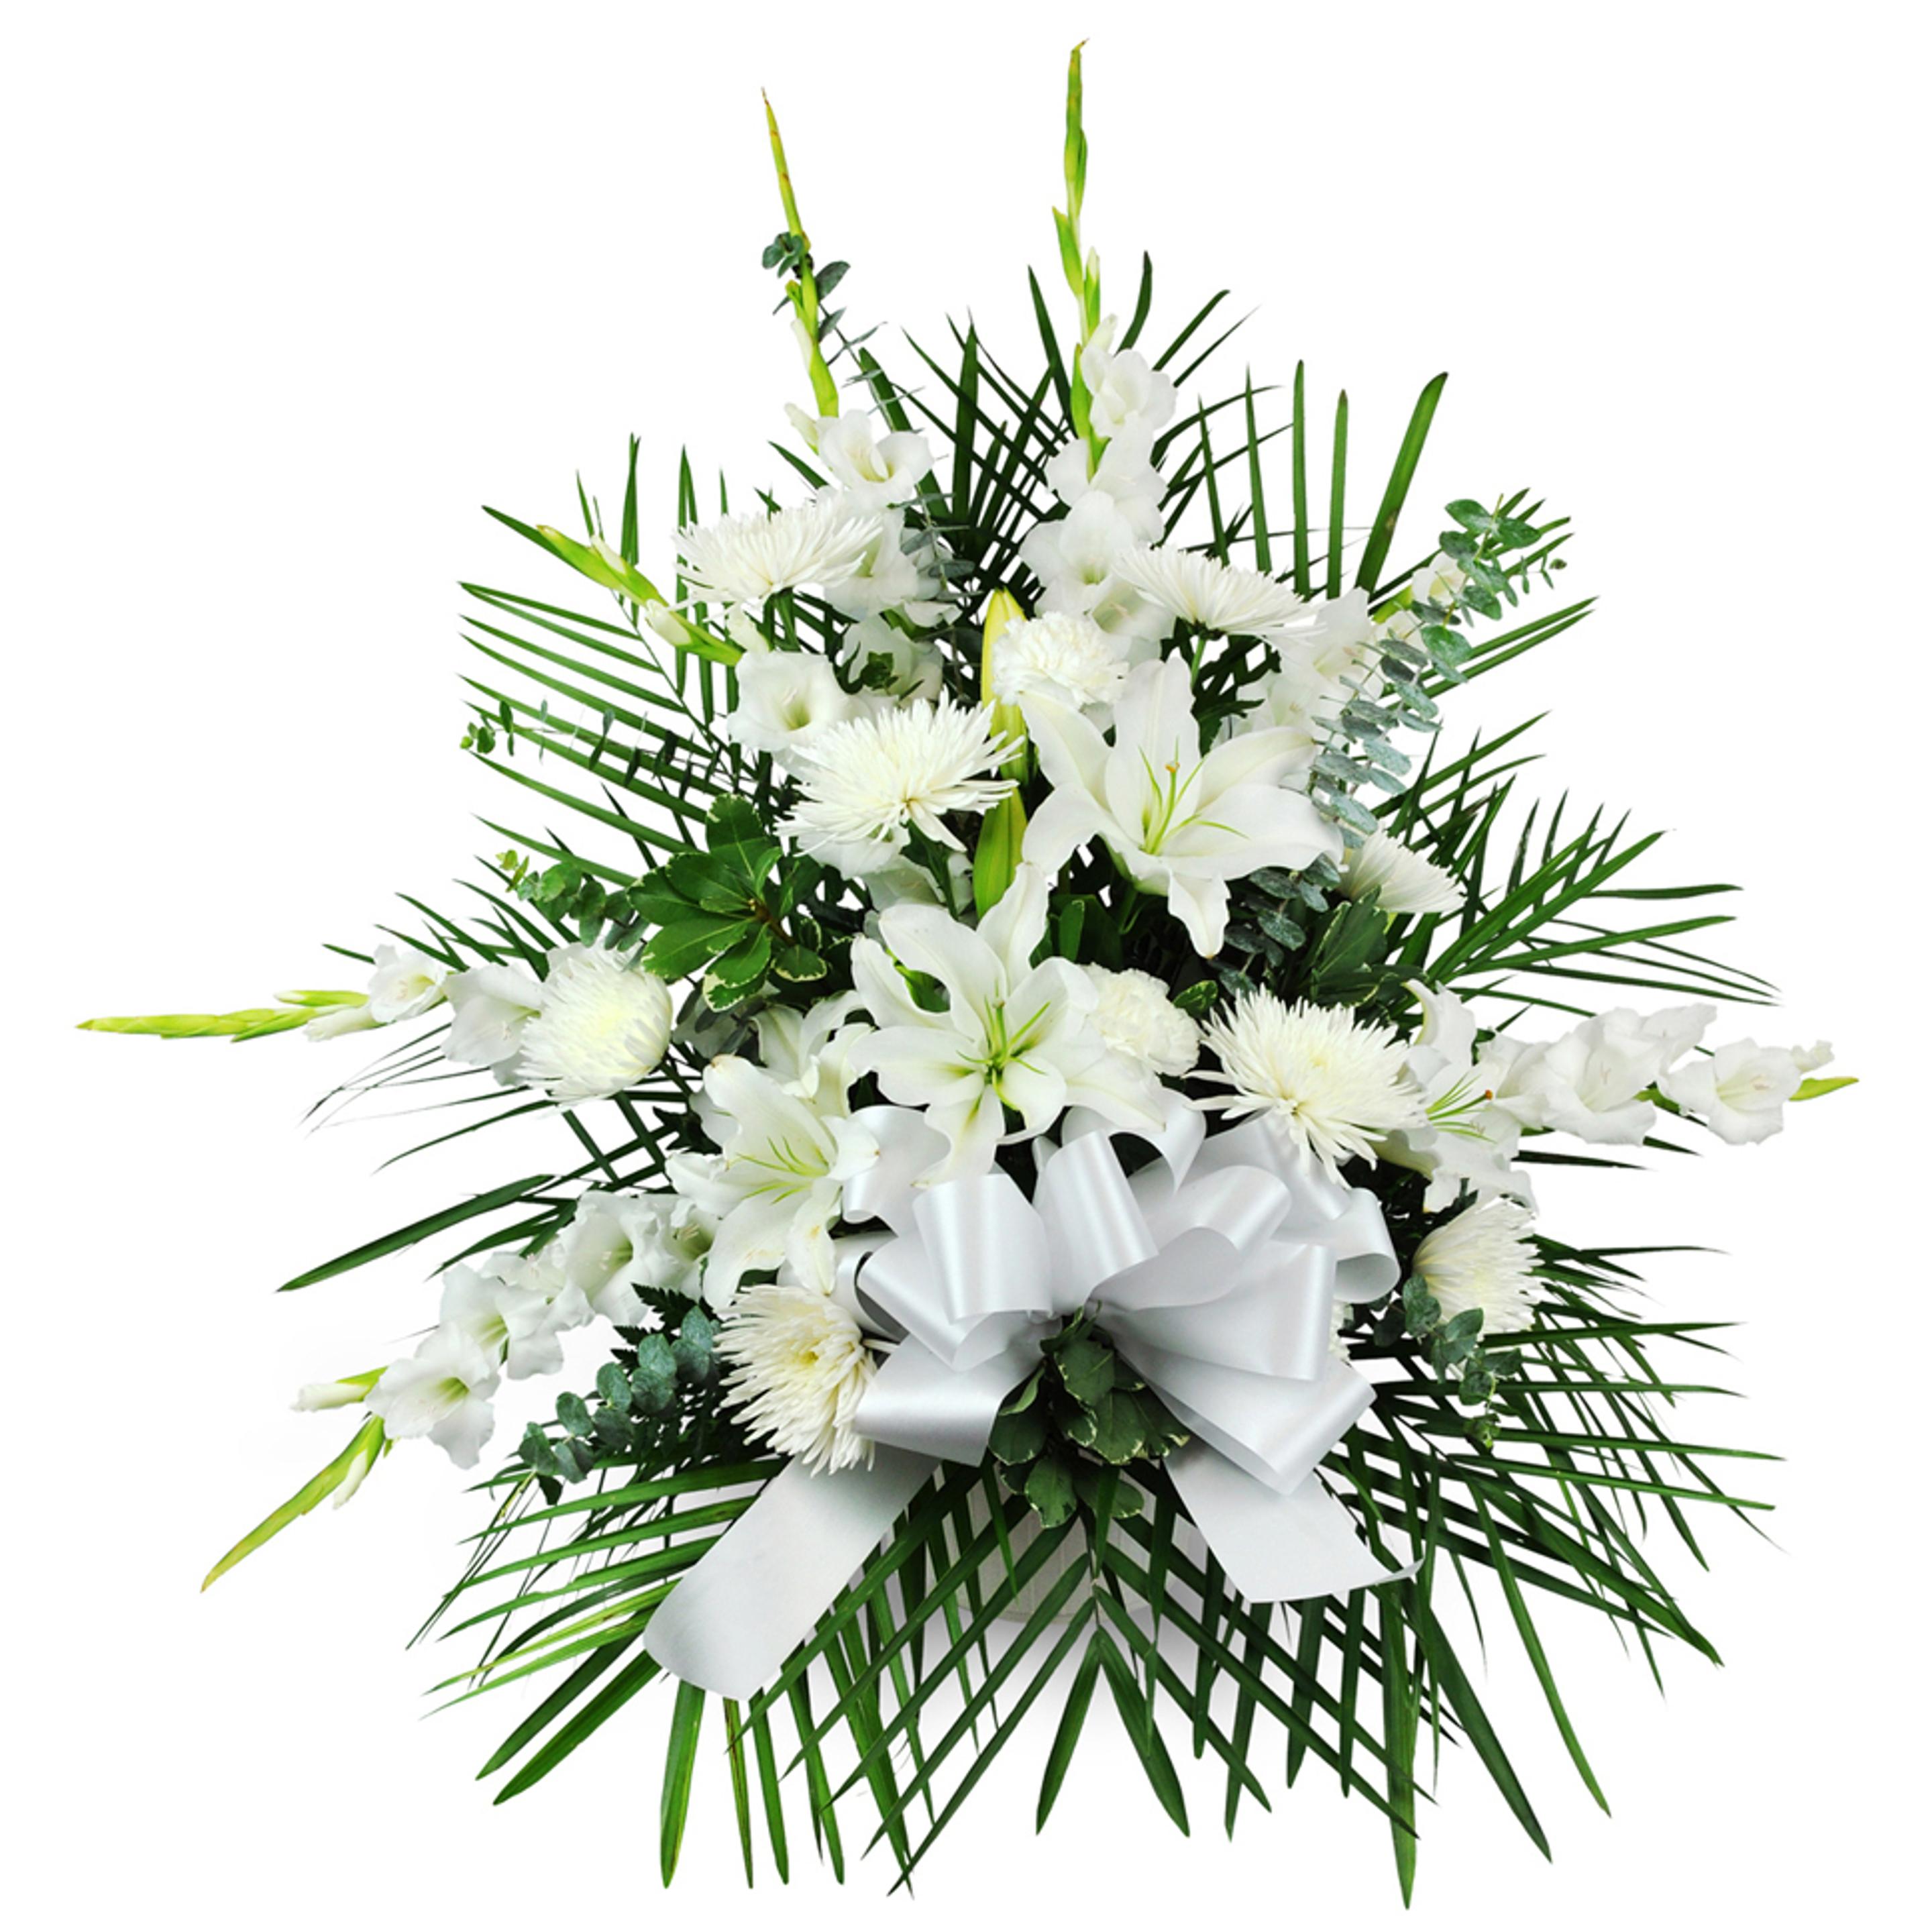 A white ribbon tied around an elegant and thoughtful white floral arrangement for sympathy.